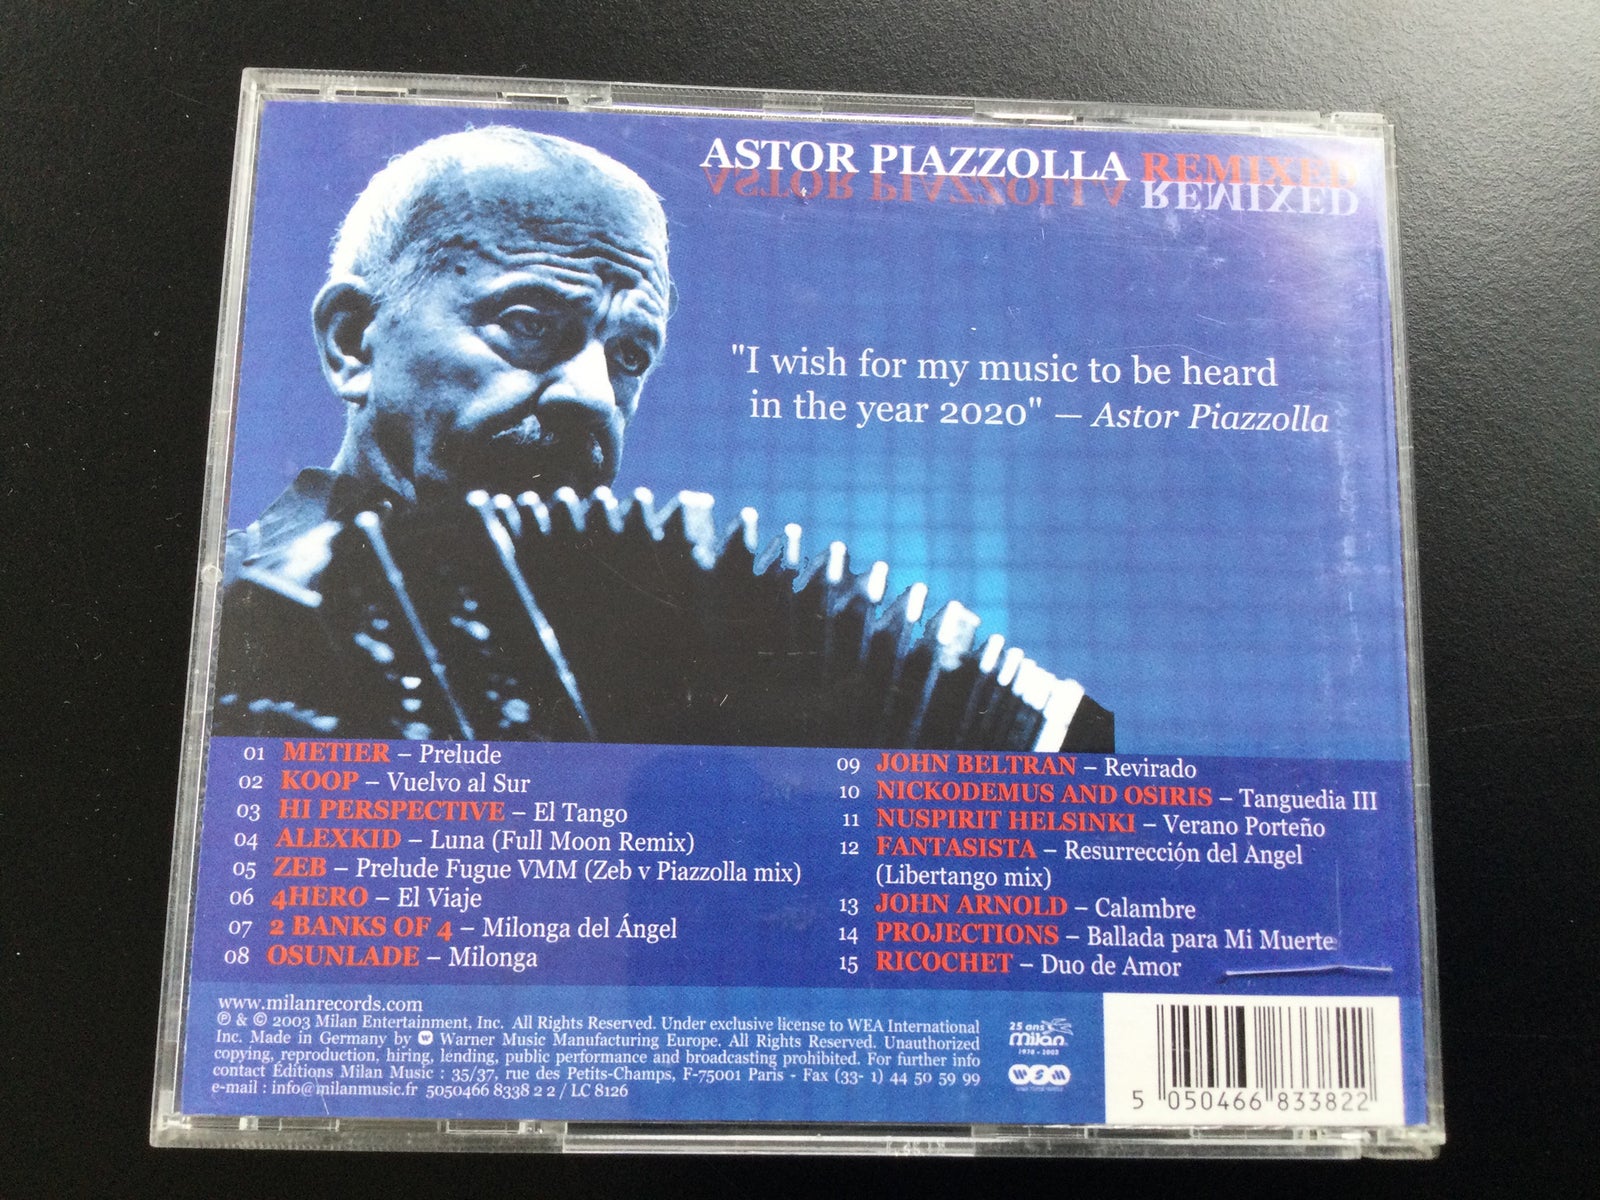 Astor Piazzolla: Astor Piazzolla (Remixed), electronic